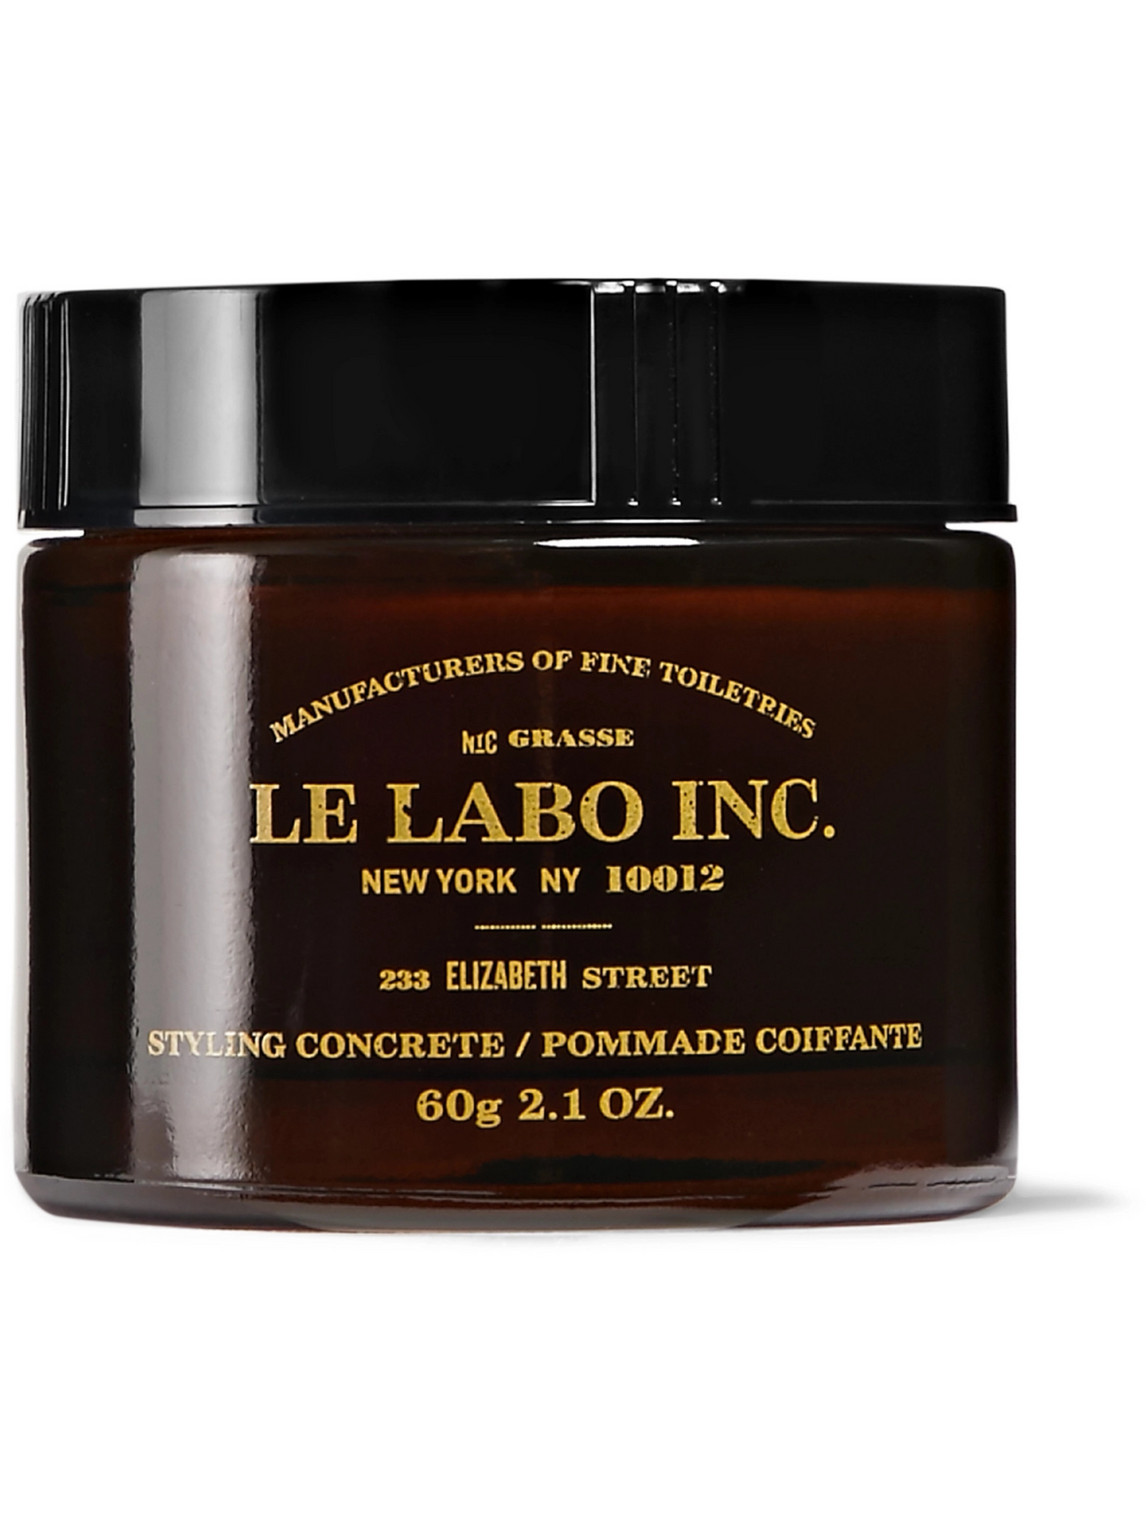 Le Labo Hair Styling Concrete, 60g In Colorless